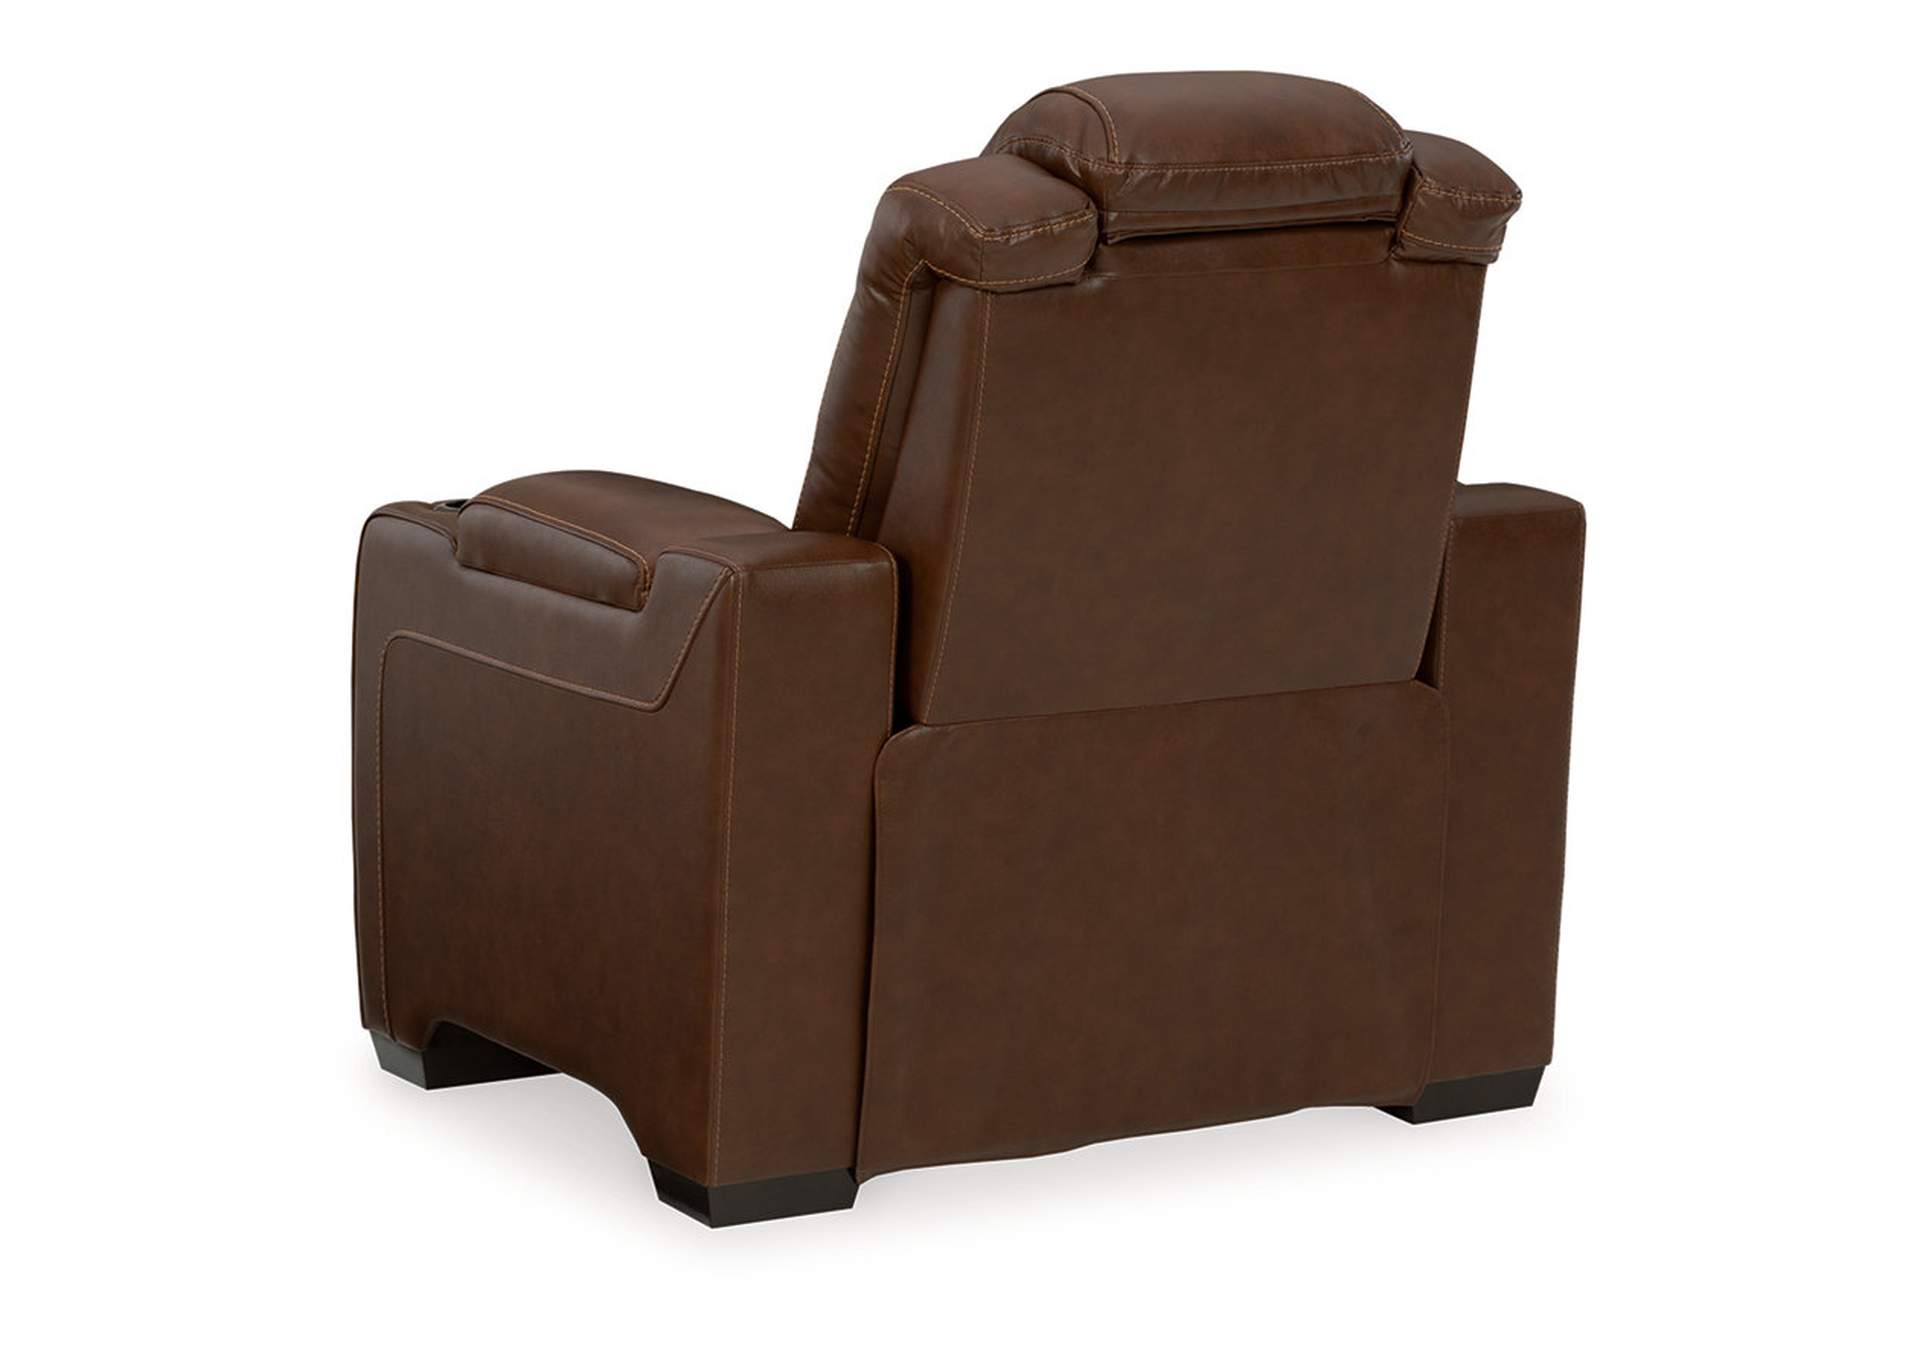 Backtrack 3-Piece Home Theater Seating,Signature Design By Ashley